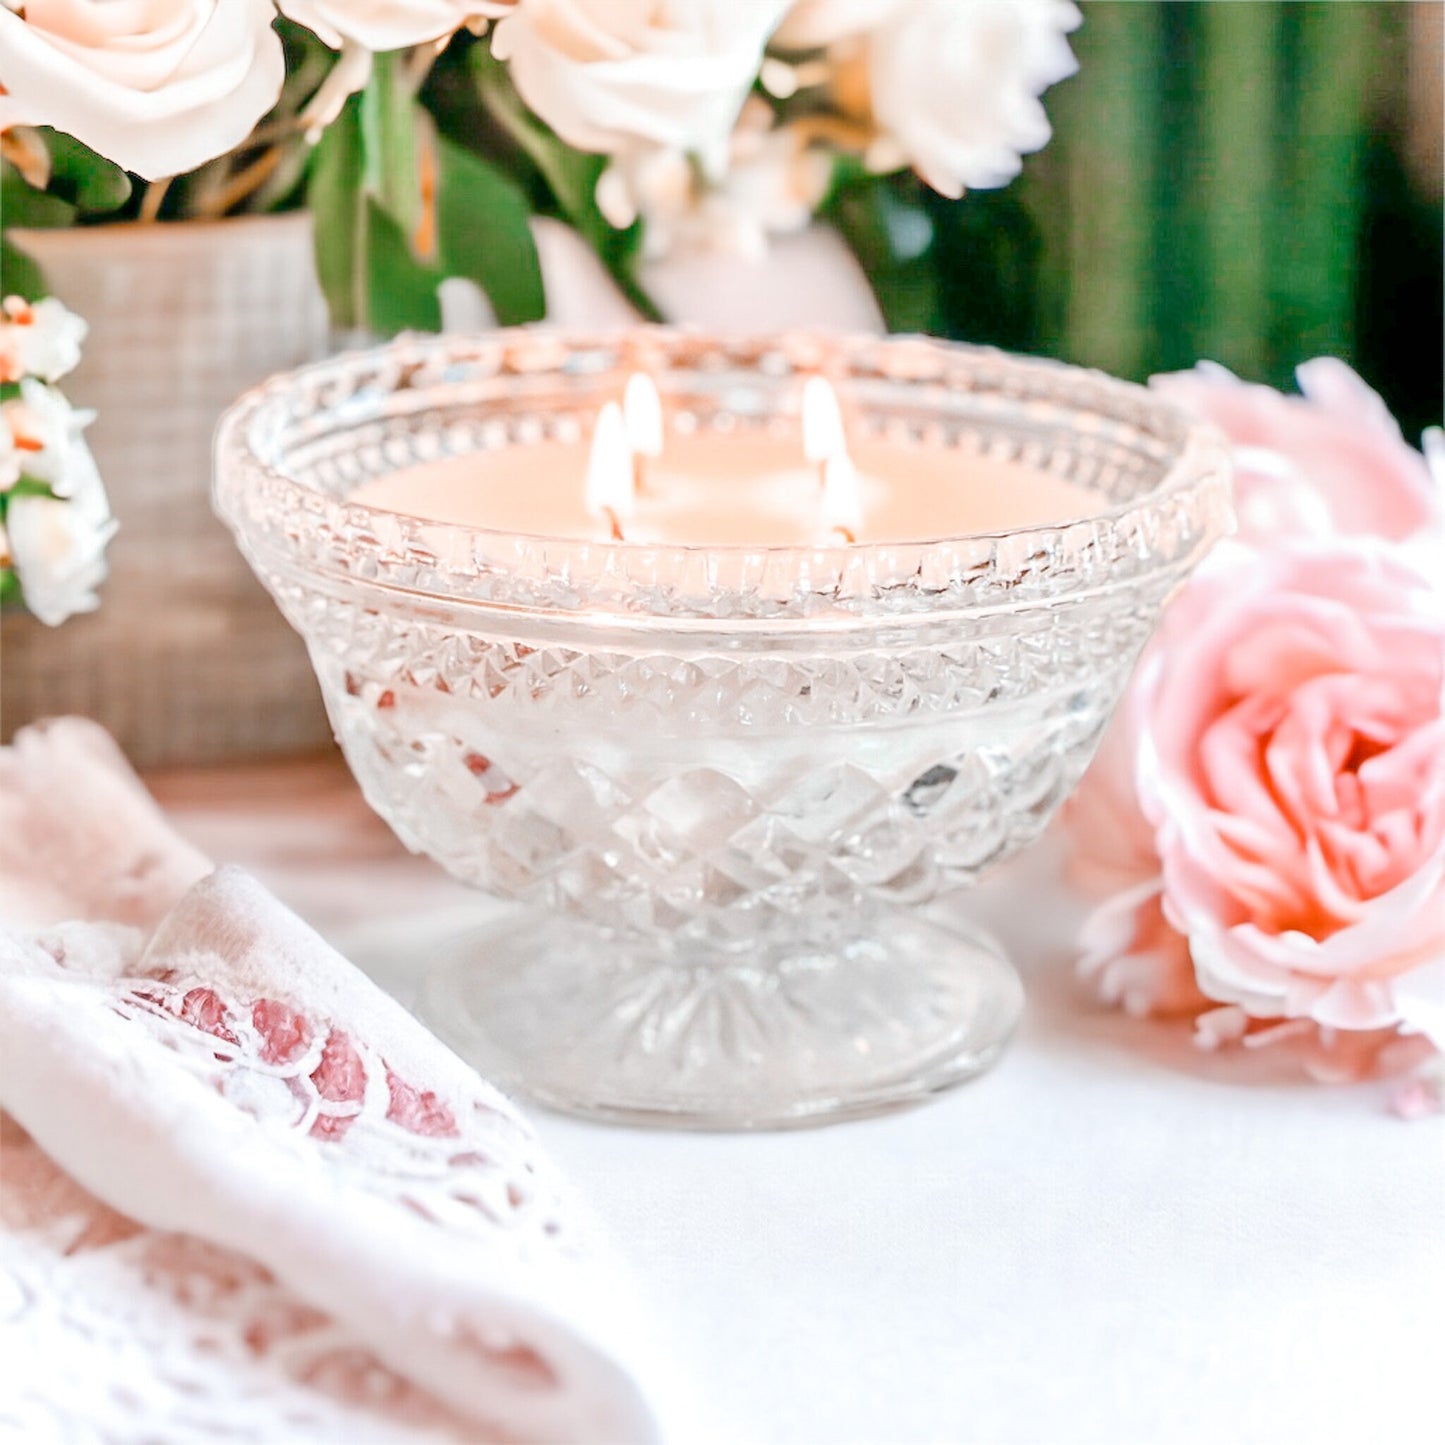 Scented Candle in Vintage Candy Dish